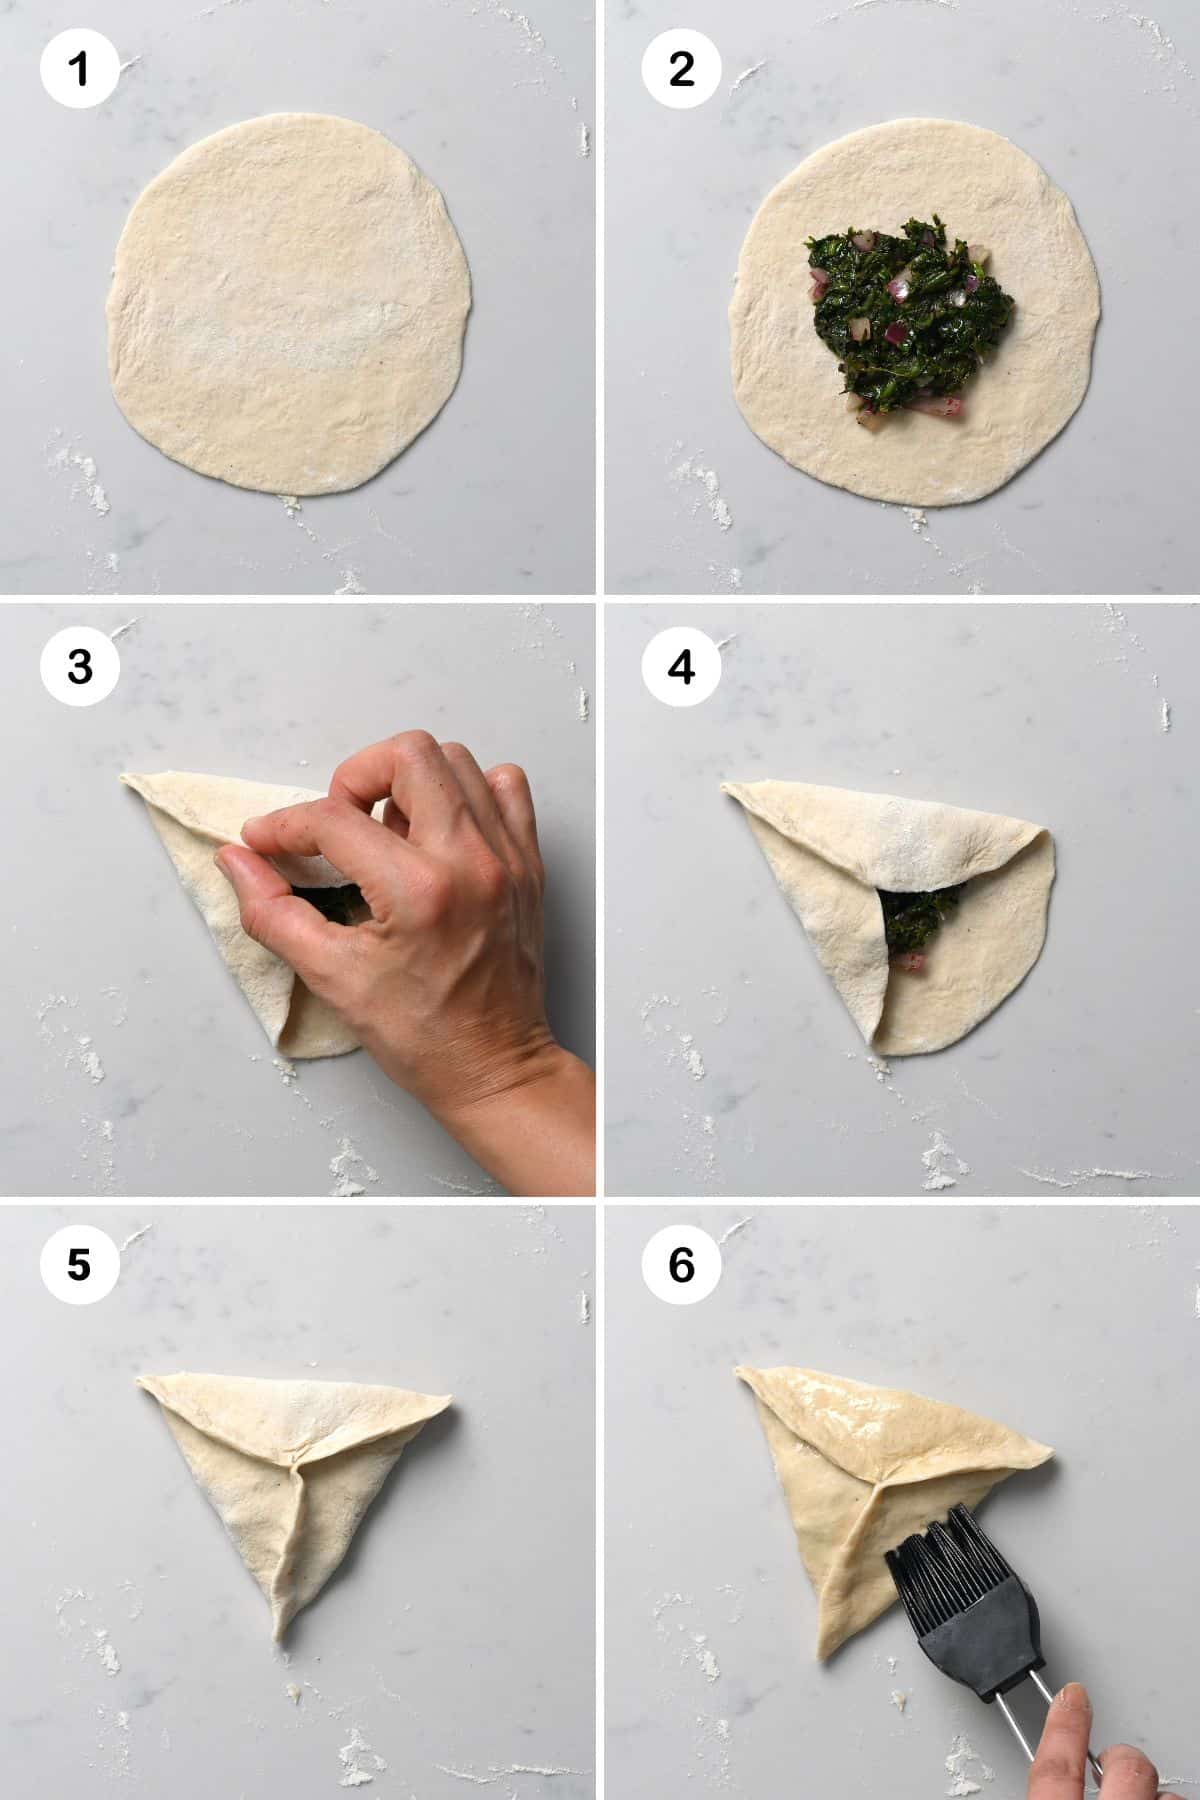 Steps for shaping Lebanese spinach pies